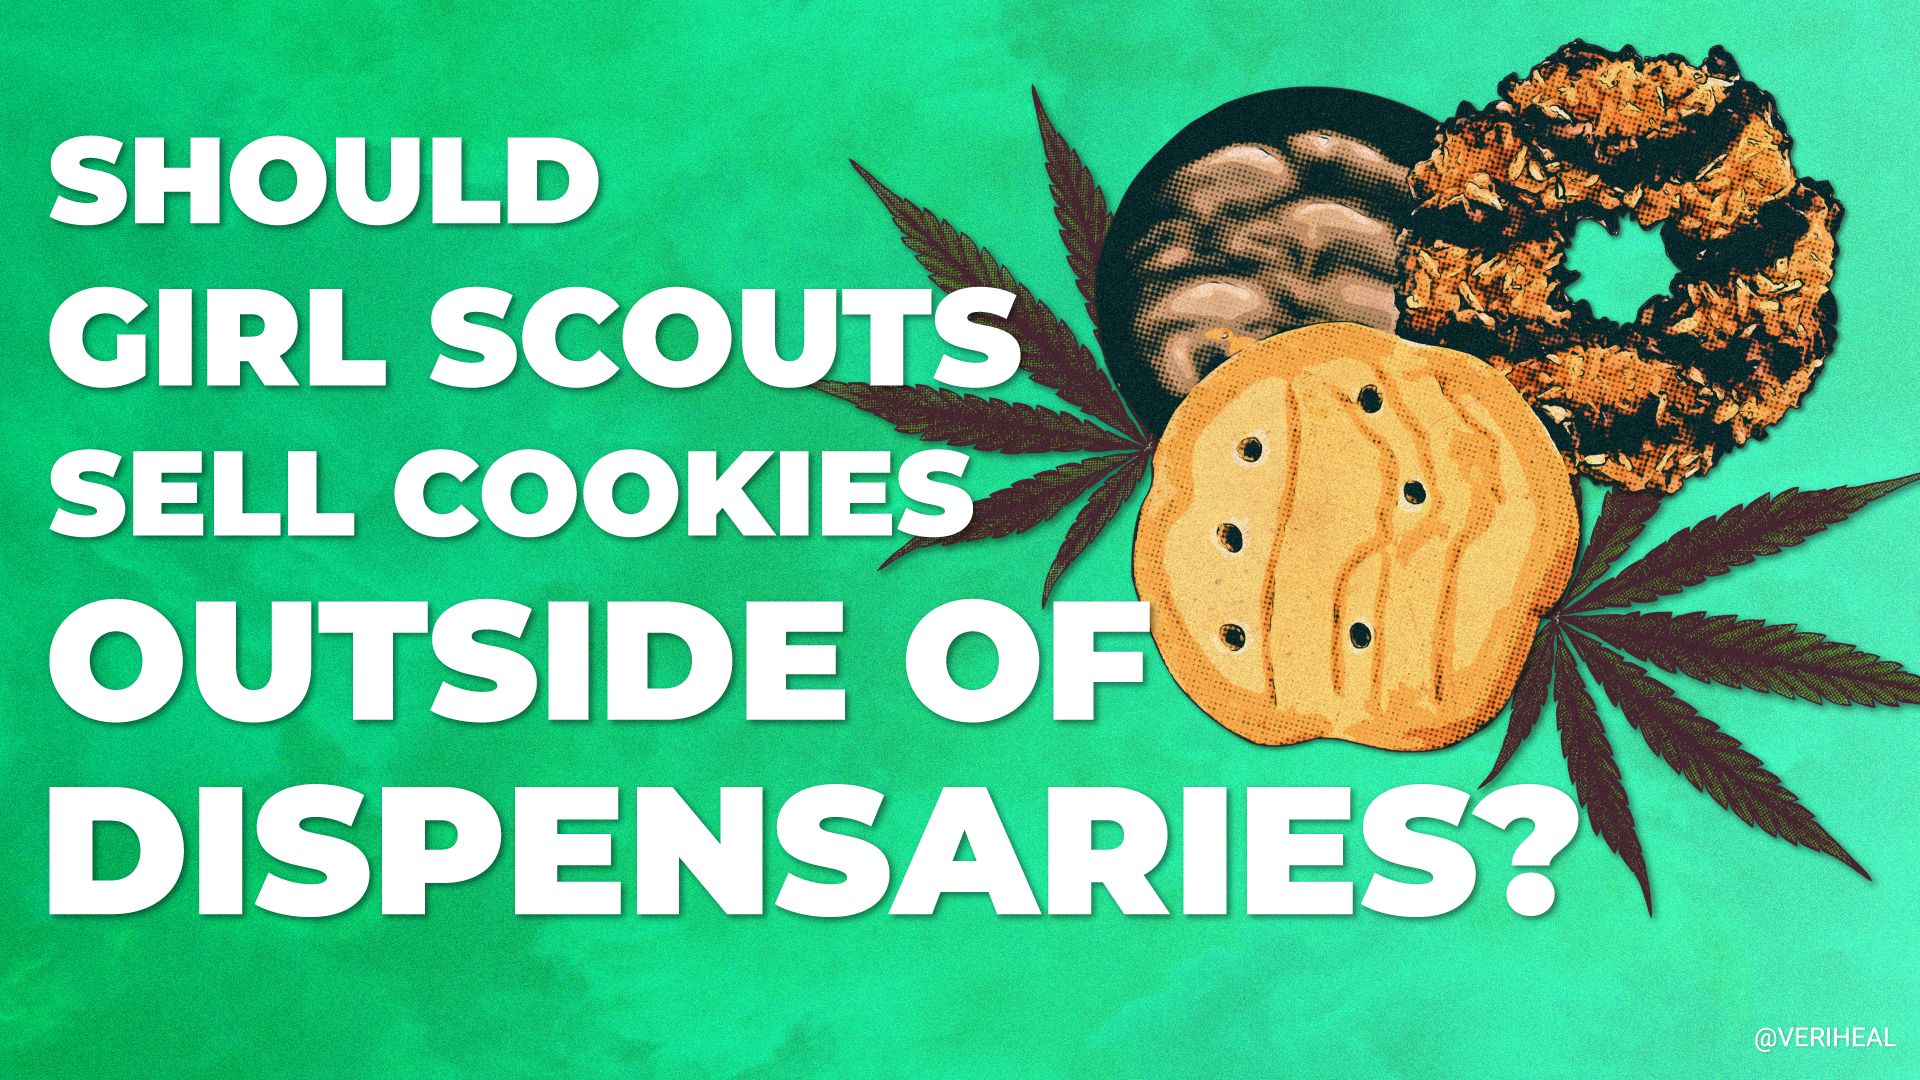 CBD and COVID Hype, Amazon’s Support for Legalization, & Girl Scout Cookies at Dispensaries